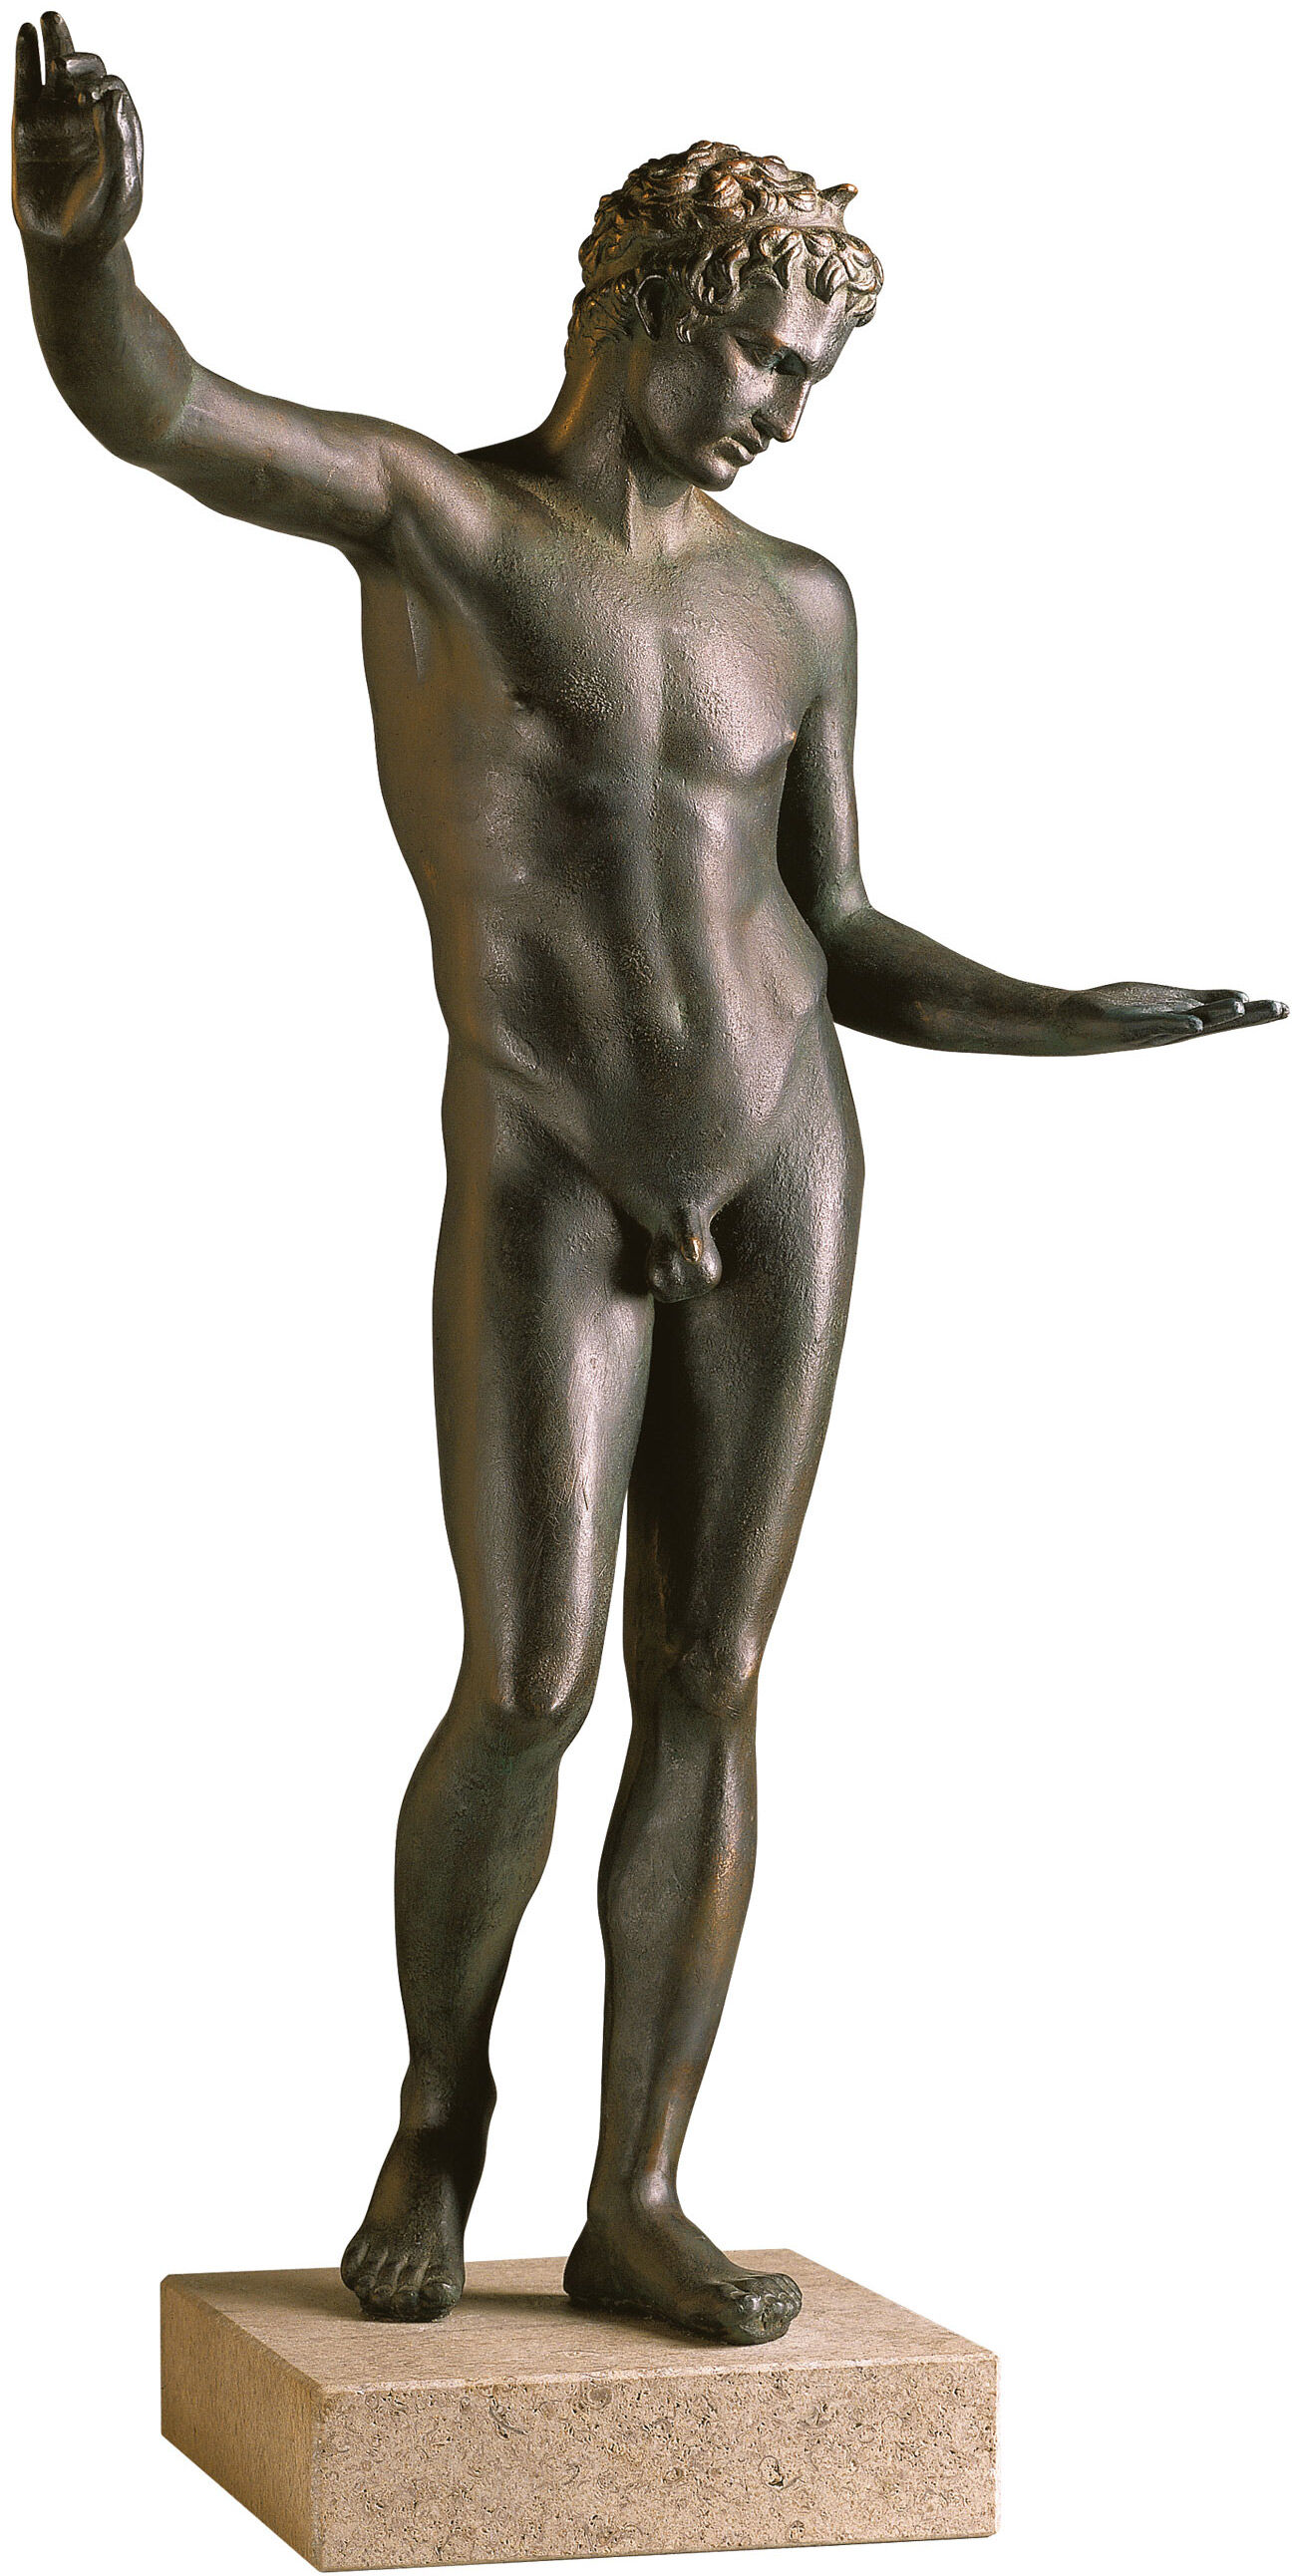 Statue "The Youth of Marathon" (reduction) by Praxiteles